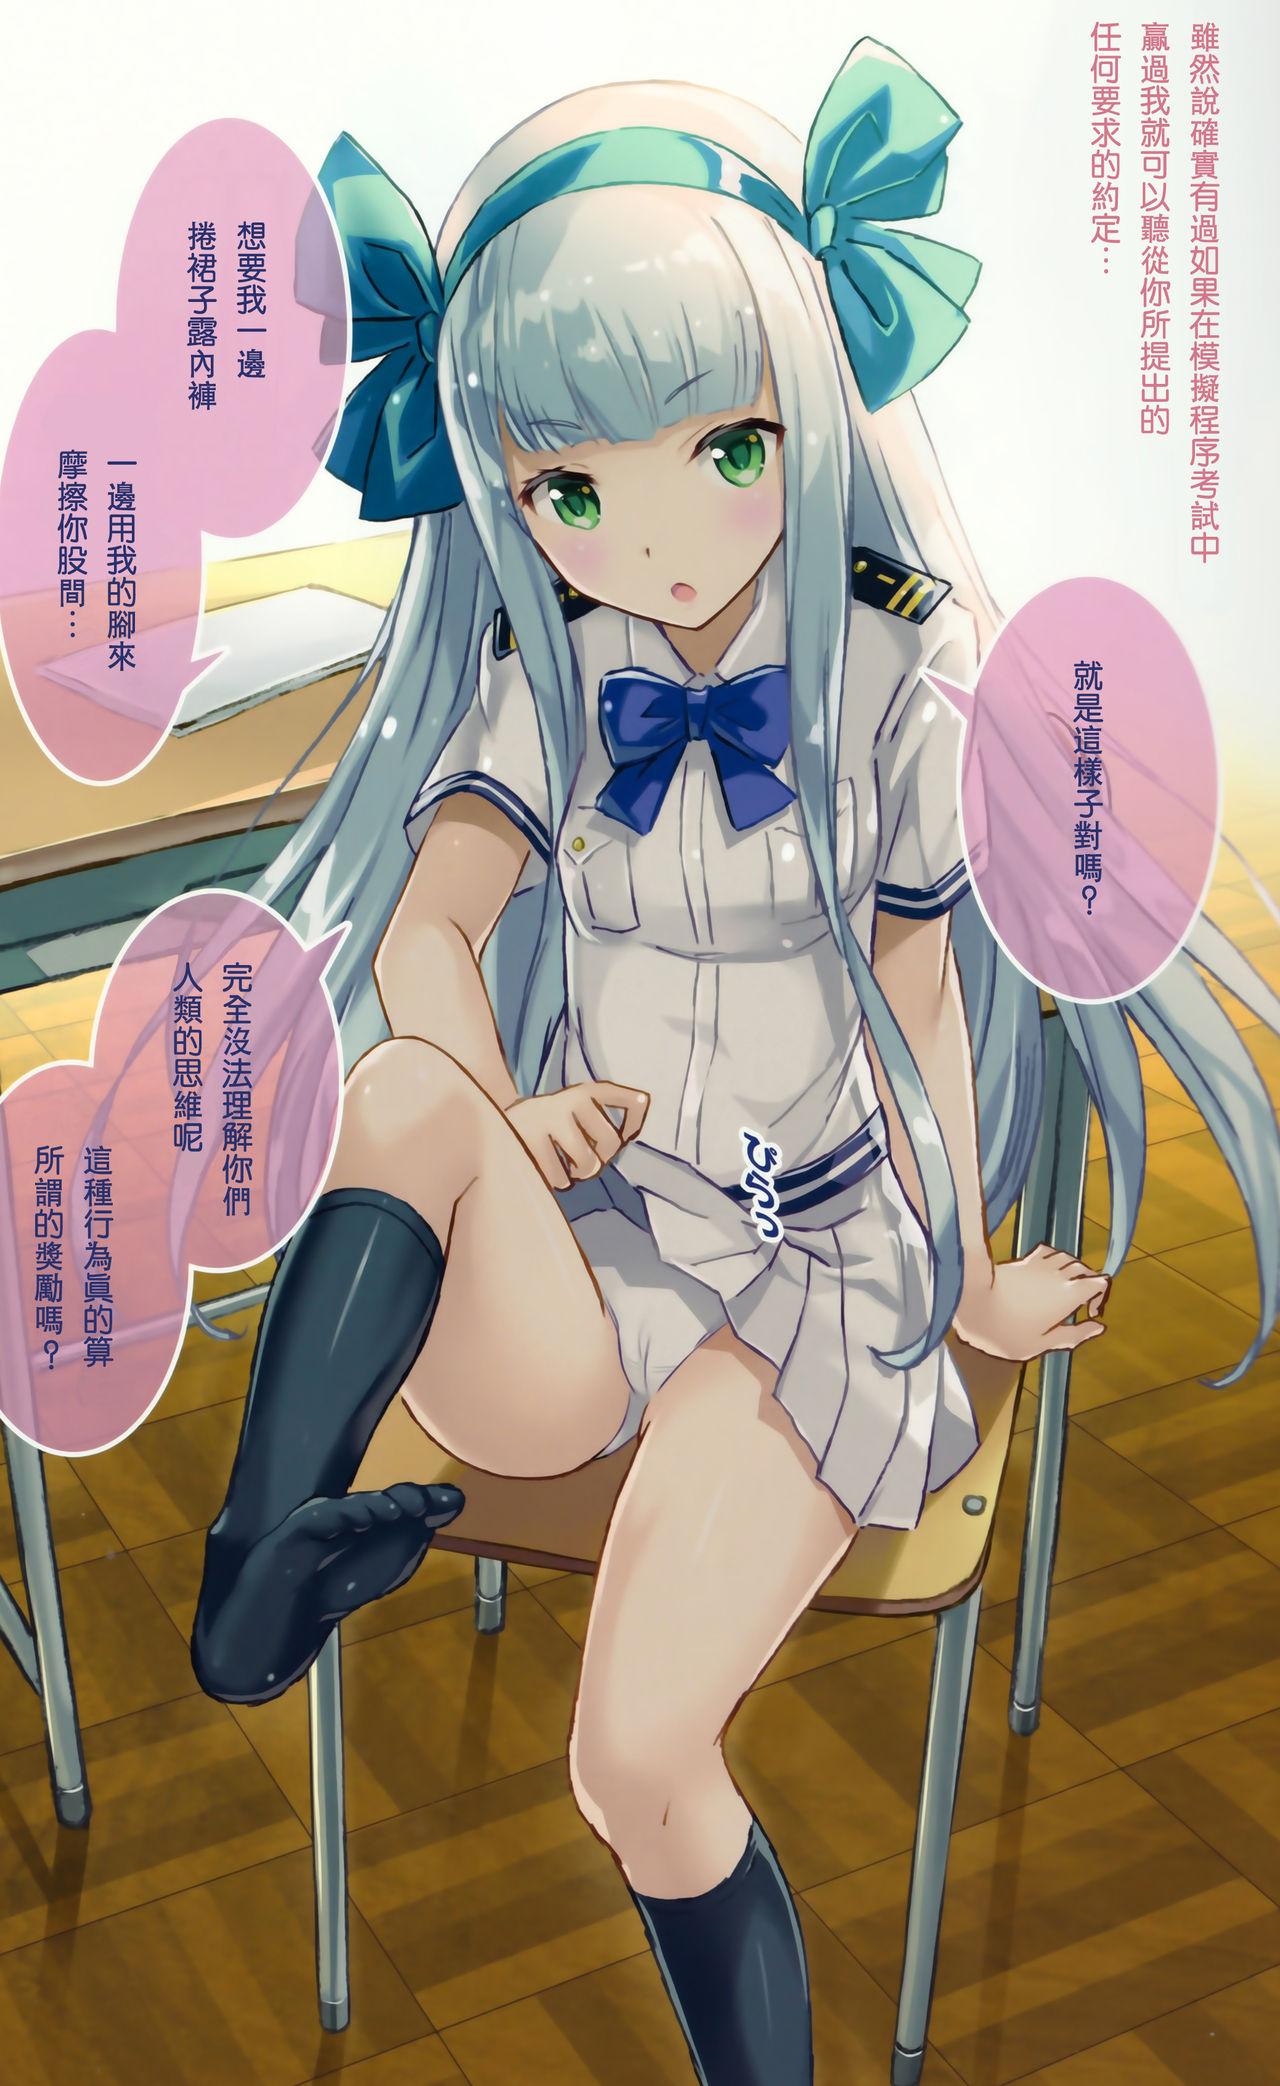 Awesome TAKAO OF BLUE STEEL 06 - Arpeggio of blue steel Oral Sex Porn - Page 7